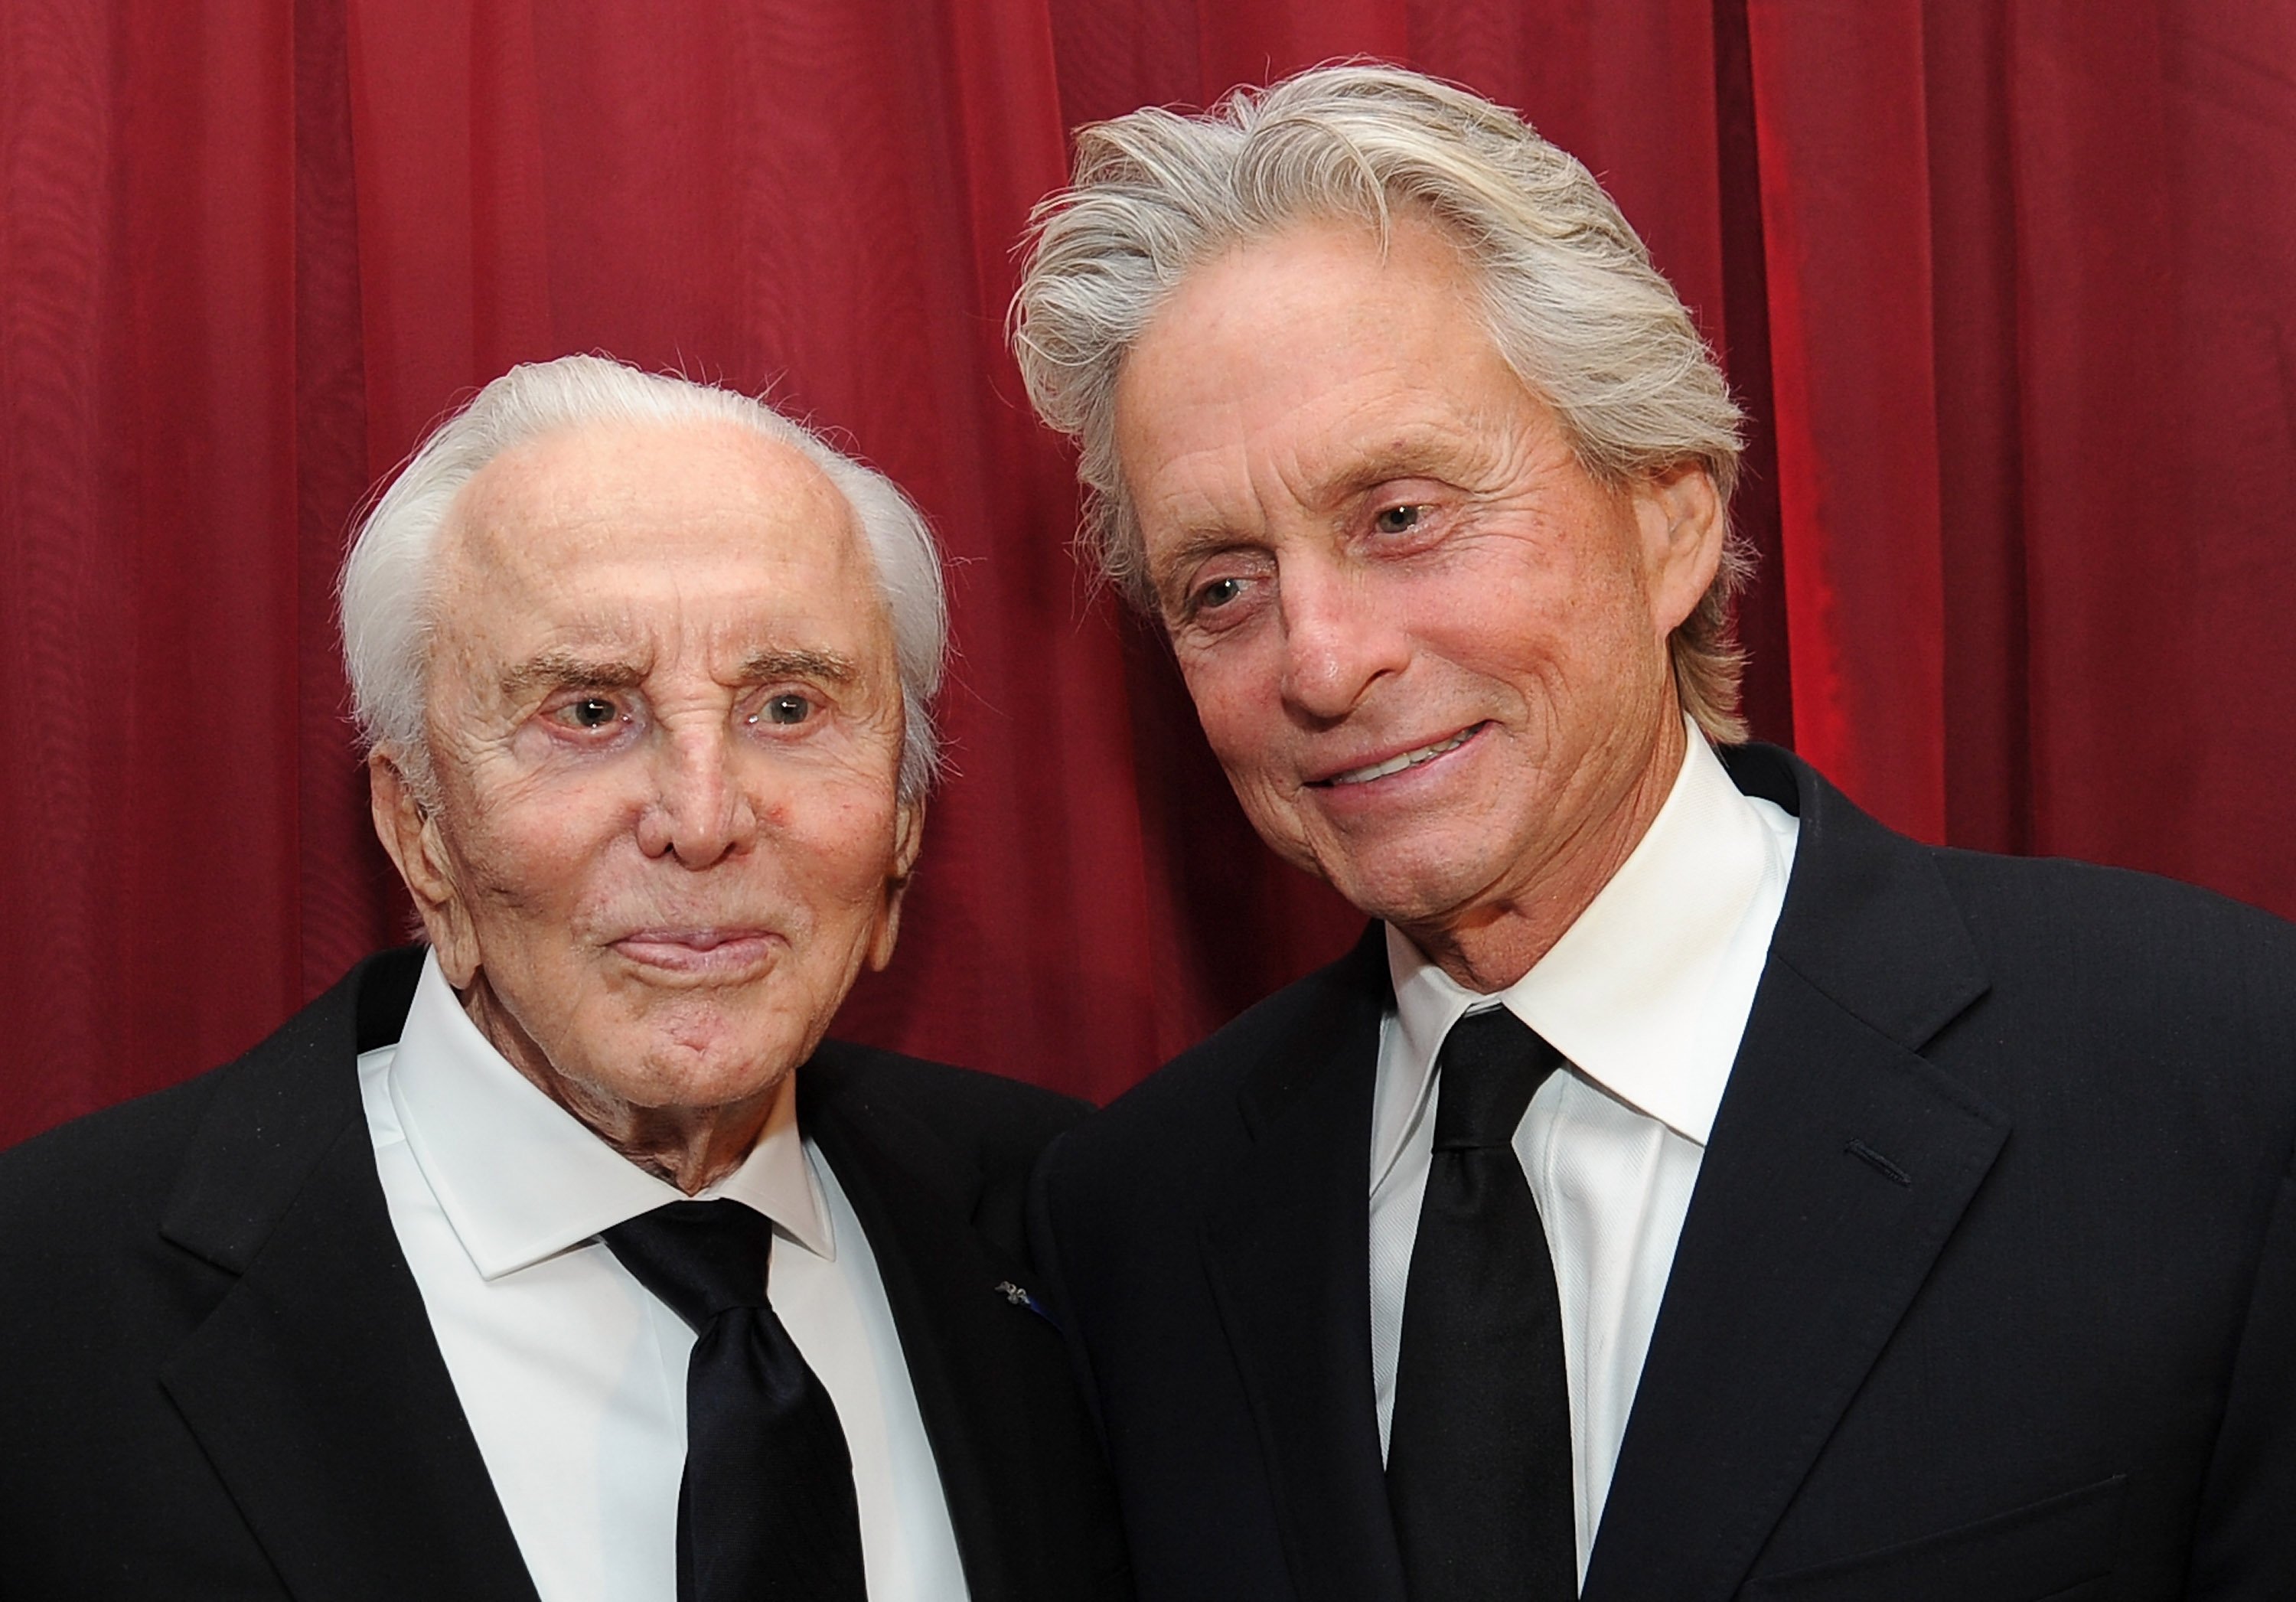 Actor Kirk Douglas (L) and actor Michael Douglas attend SBIFF's 2011 Kirk Douglas Award for Excellence In Film honoring Michael Douglas at the Biltmore Four Seasons on October 13, 2011| Photo: Getty Images